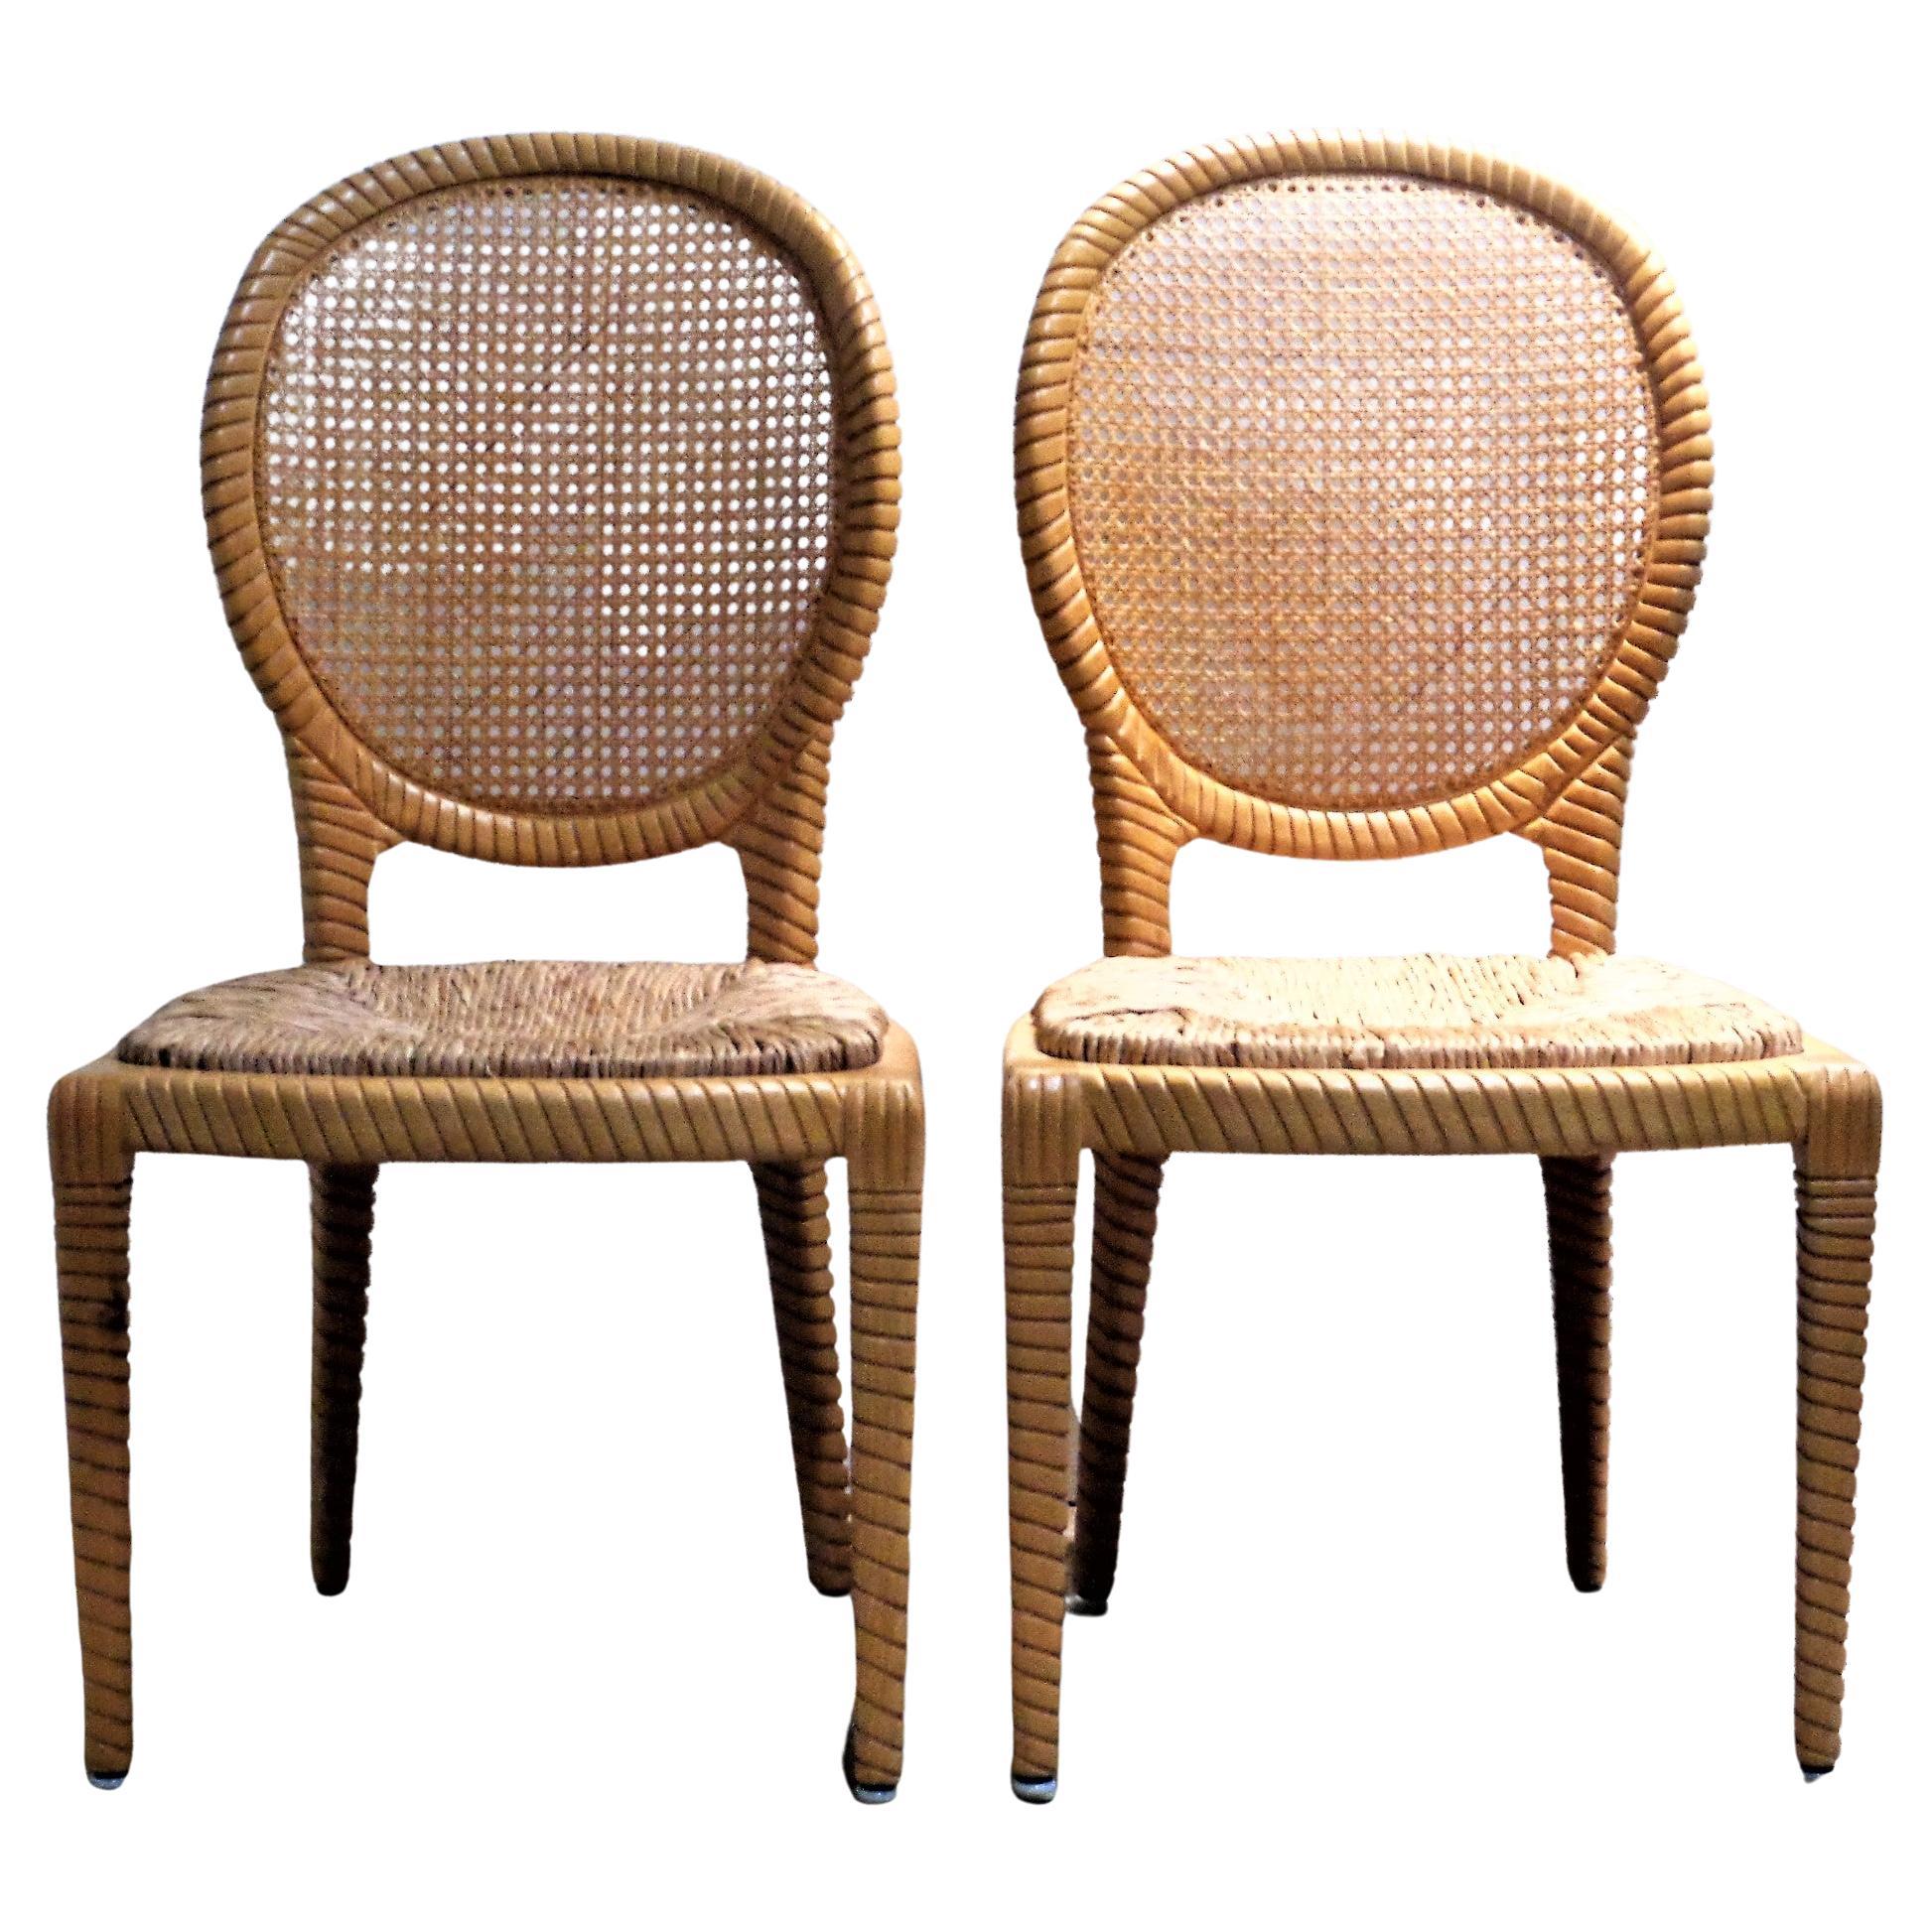 Hollywood Regency Pair of Faux Rope Carved Wood Chairs For Sale